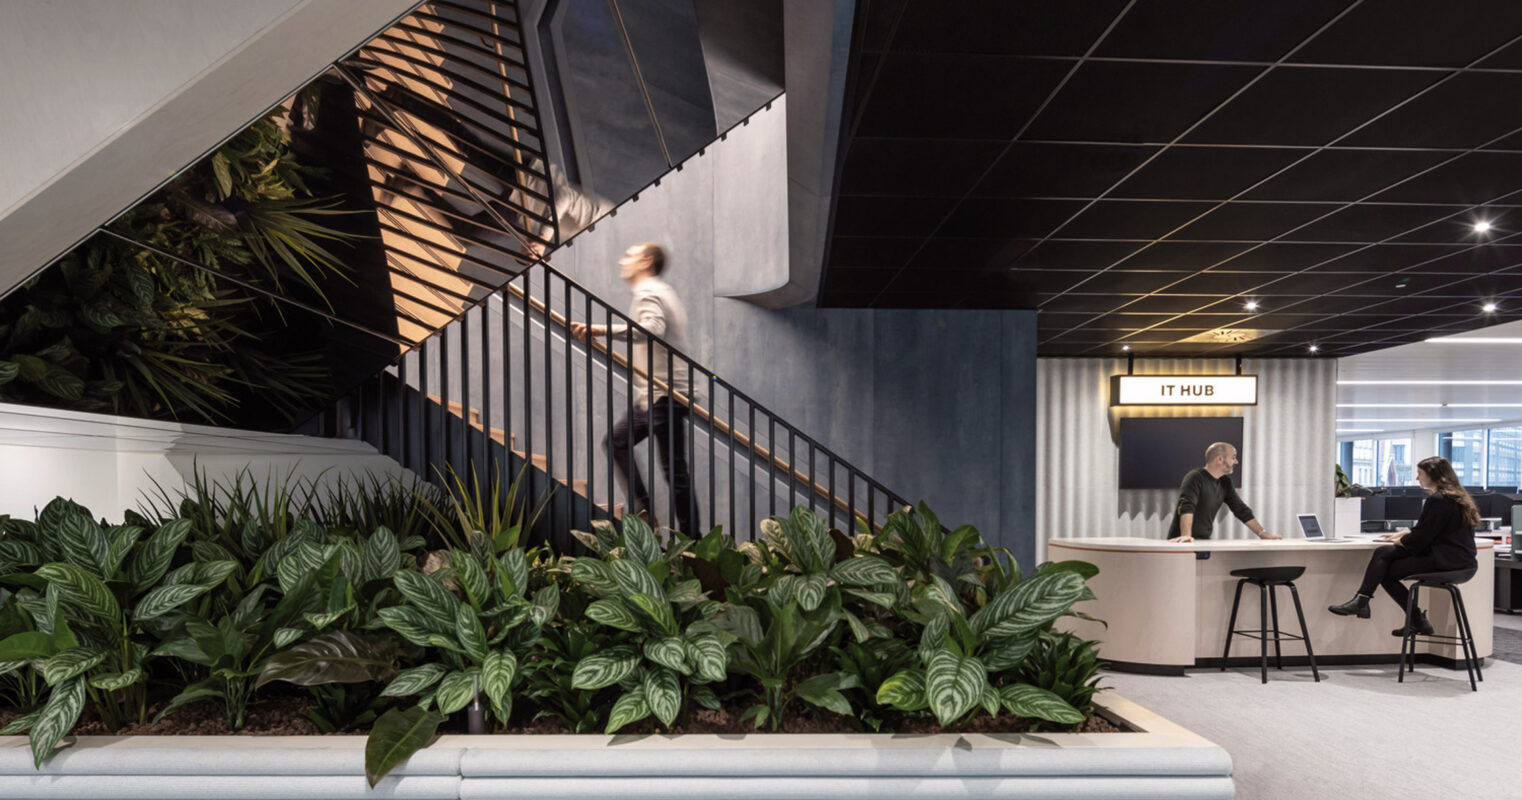 Modern office lobby with a sleek staircase featuring geometric railings, surrounded by lush greenery. The space evokes a dynamic work environment with its contrasting dark ceiling and soft blue upholstered seating area near the reception desk.